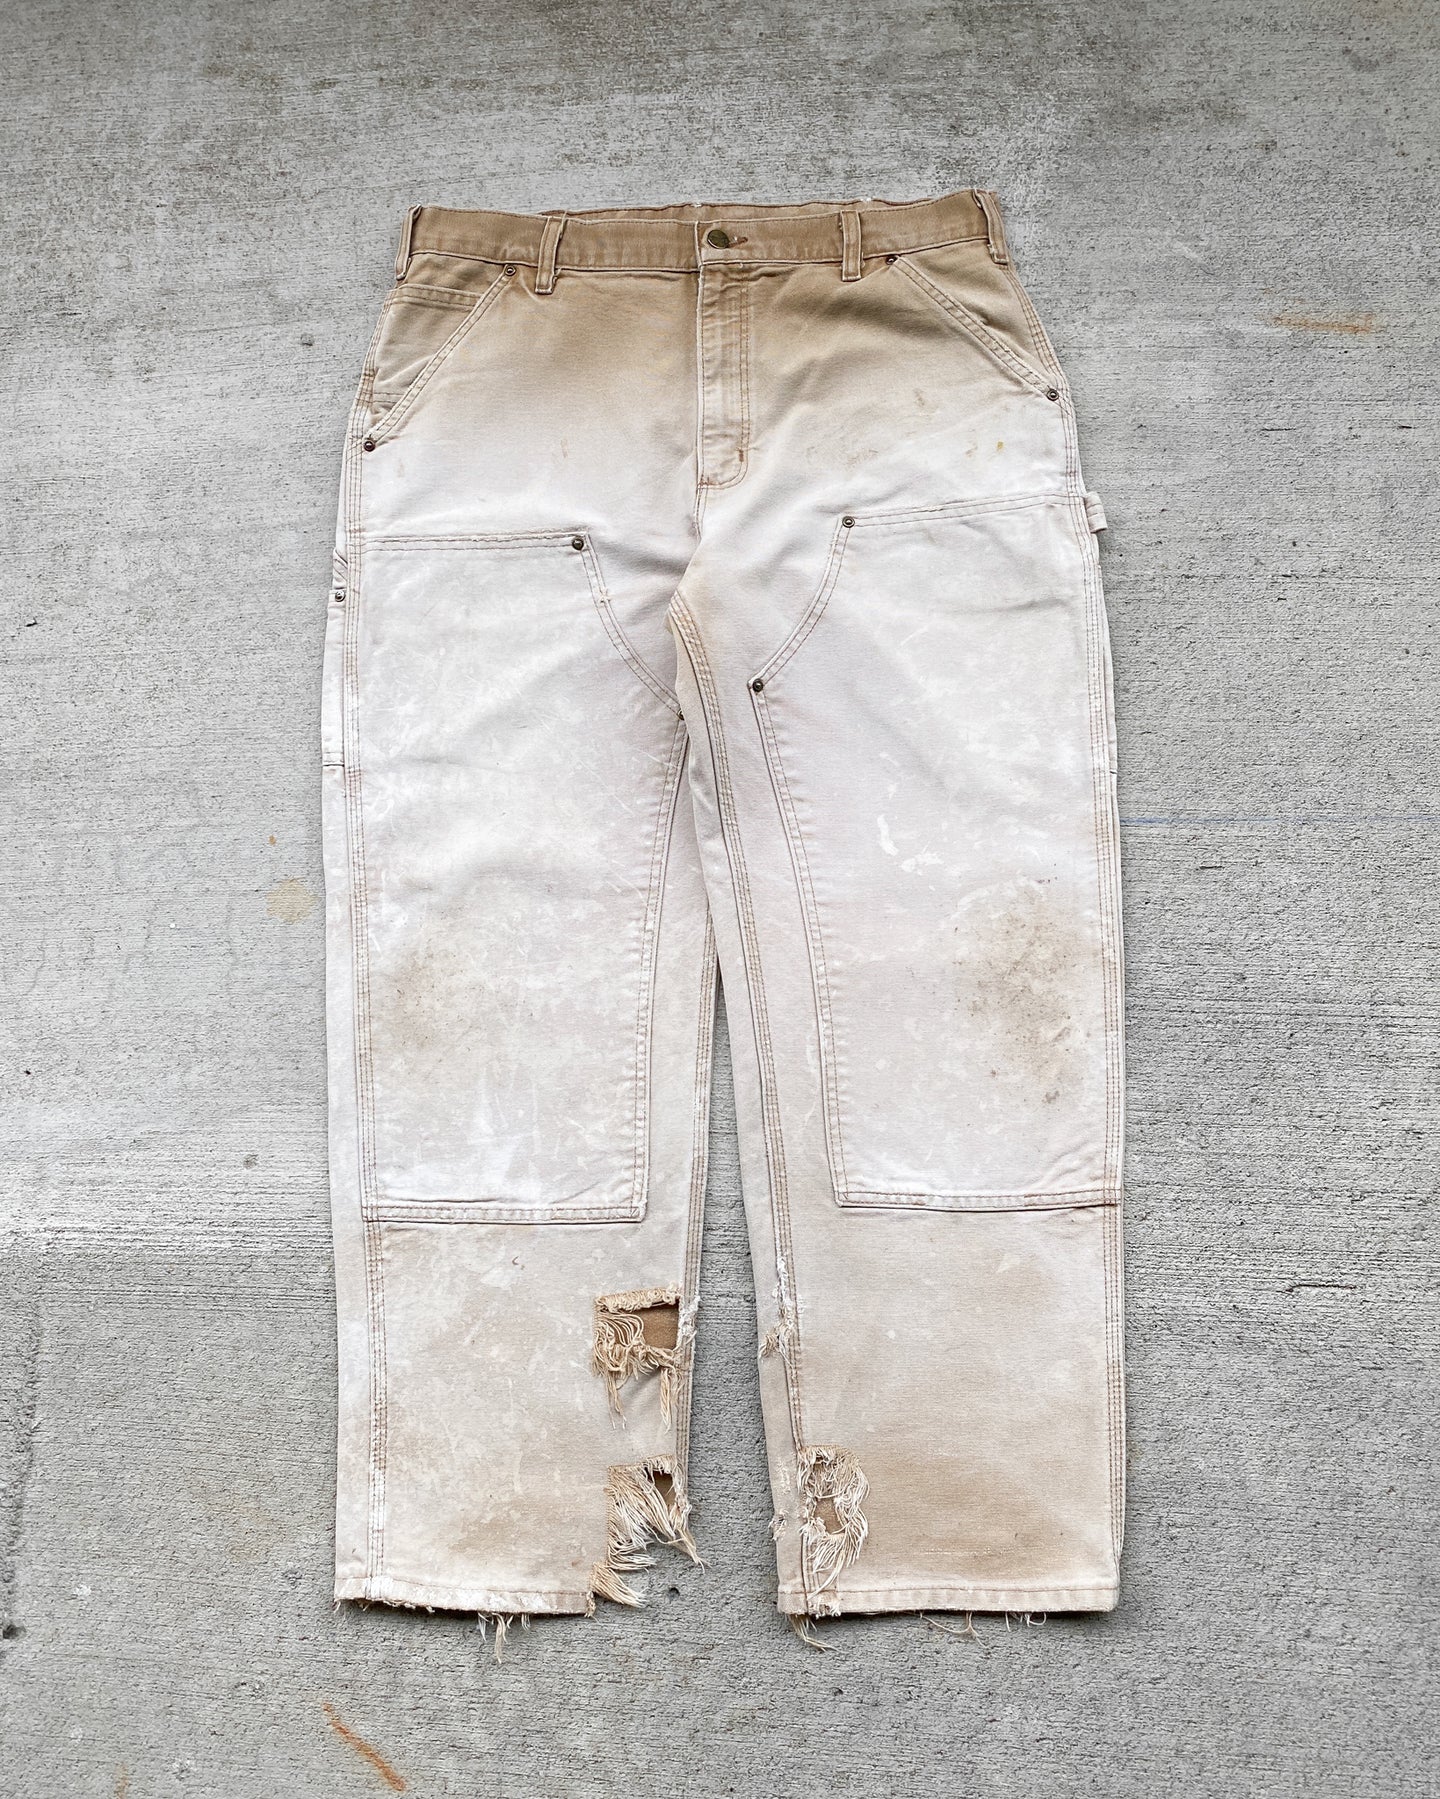 Carhartt Sun Bleached Distressed Double Knee Pants - Size 36 x 30